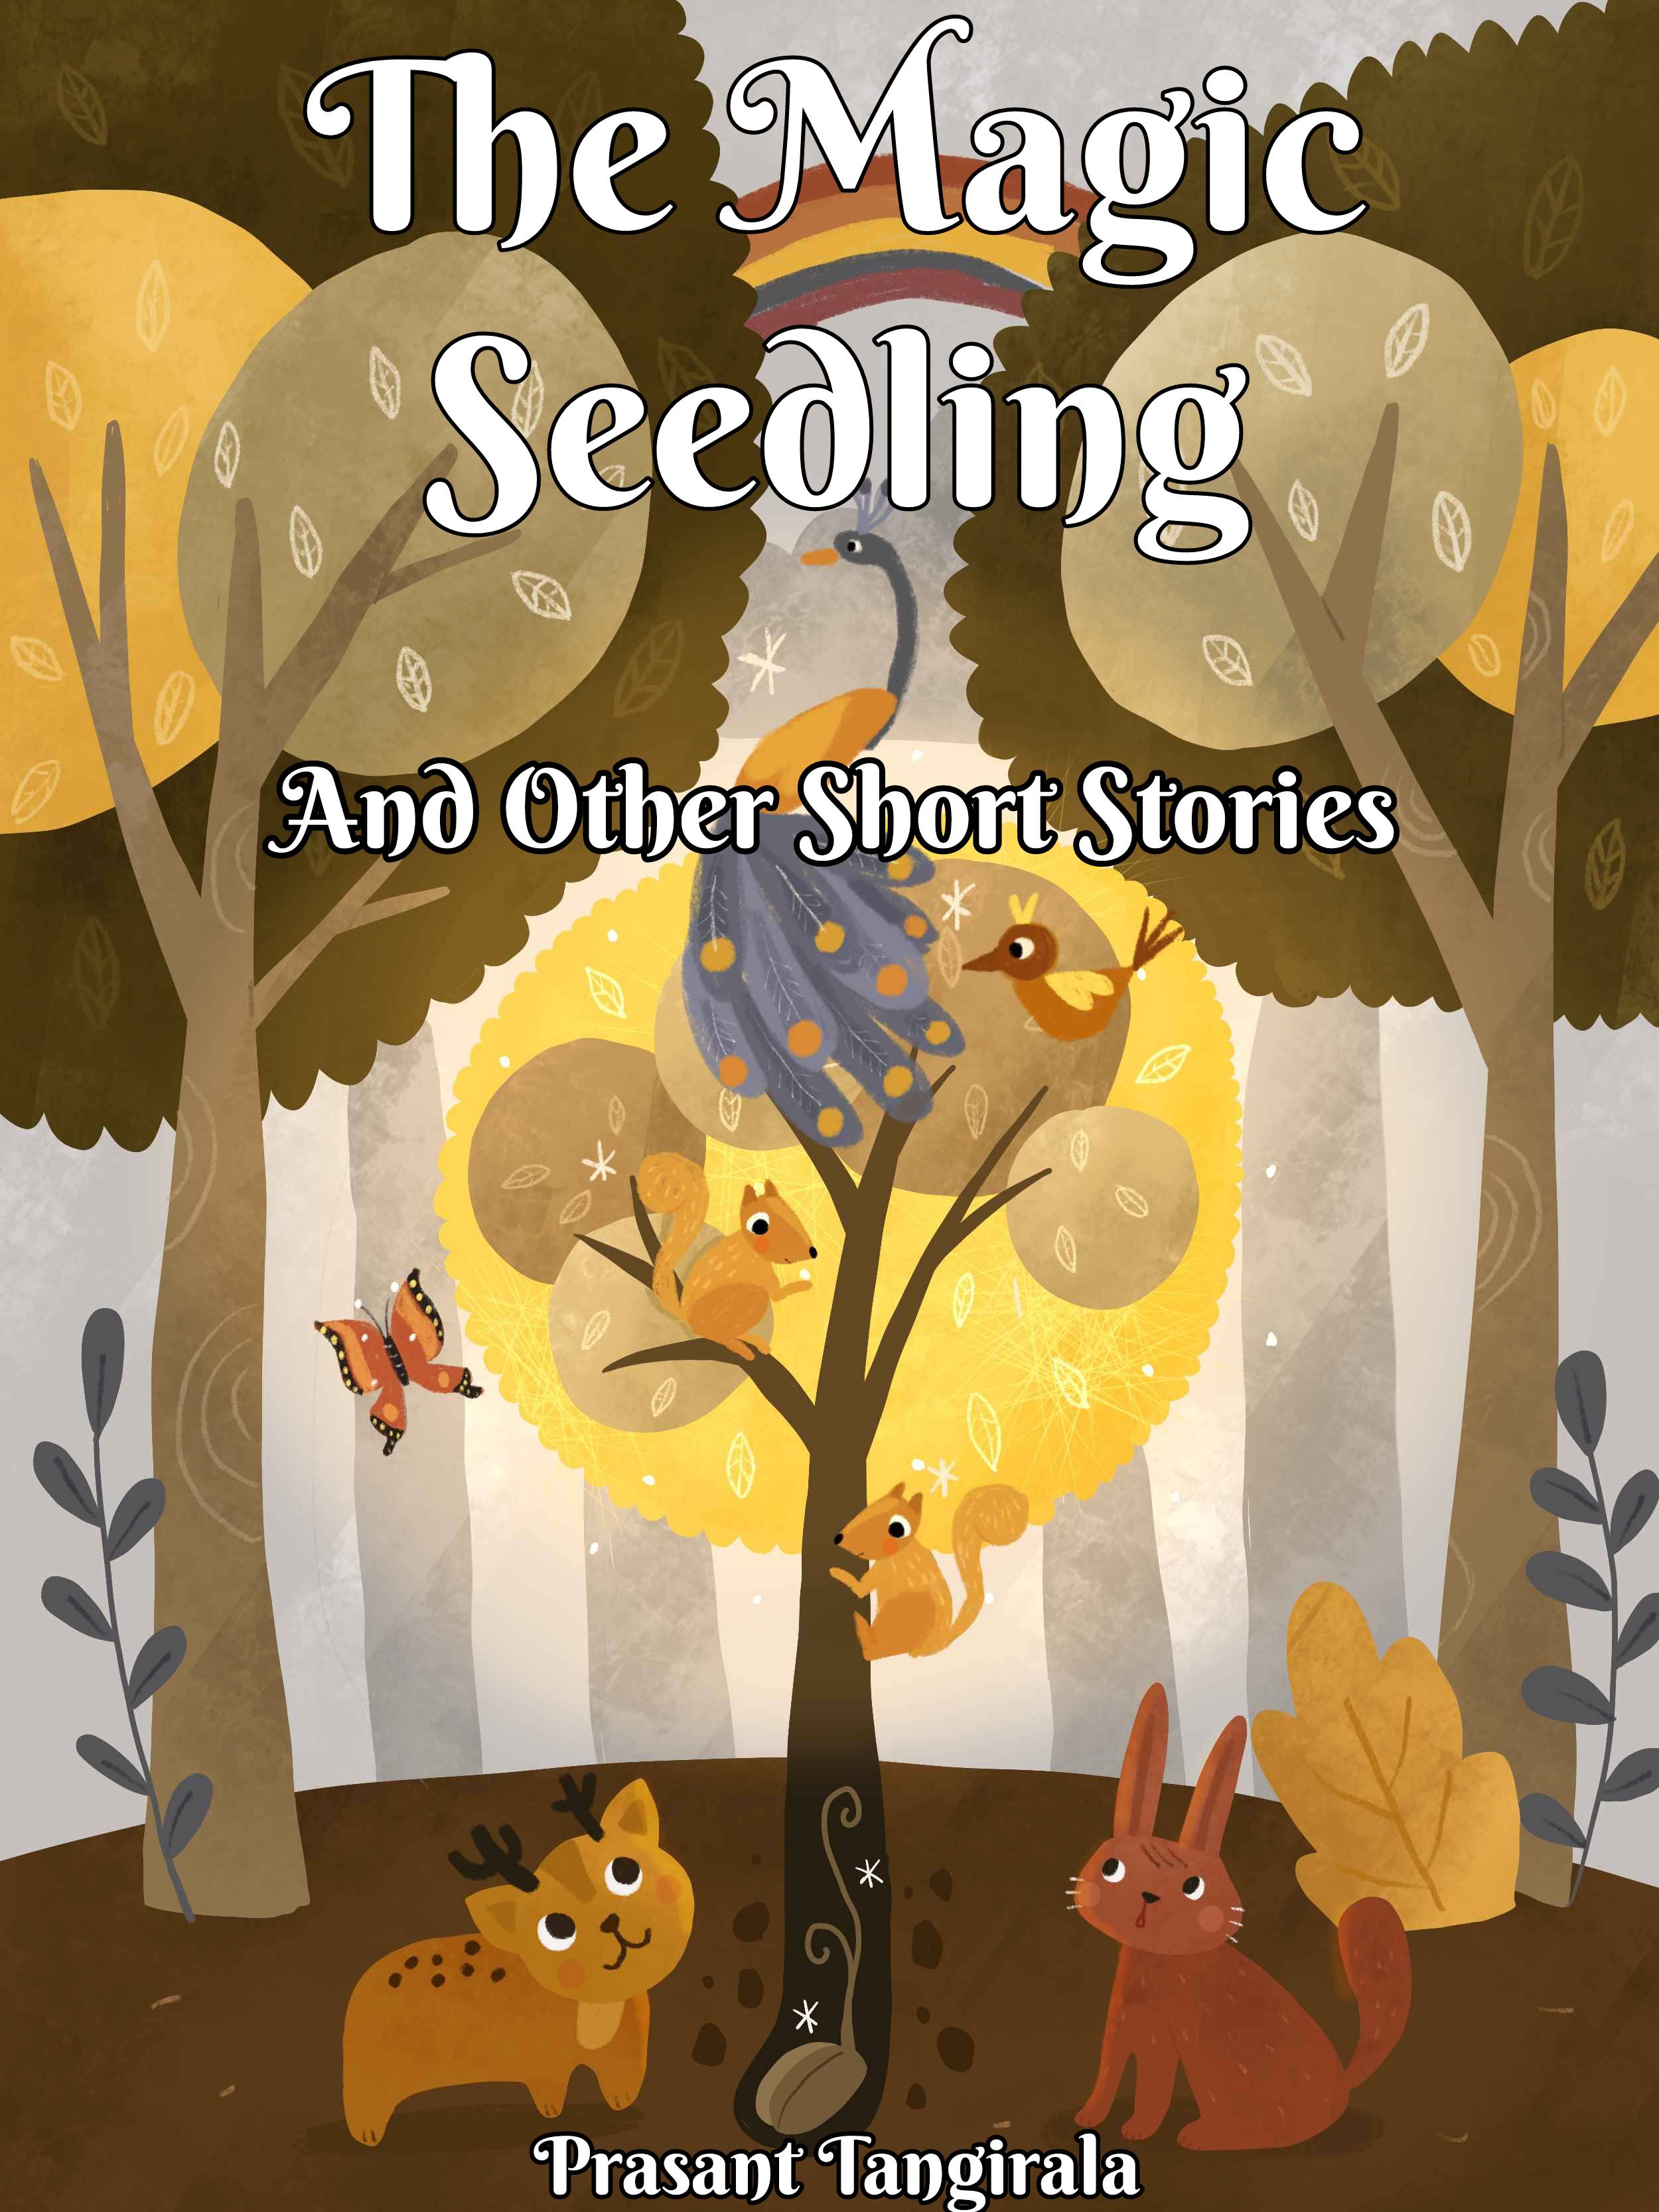 FREE: The Magic Seedling and Other Short Stories by Prasant Tangirala